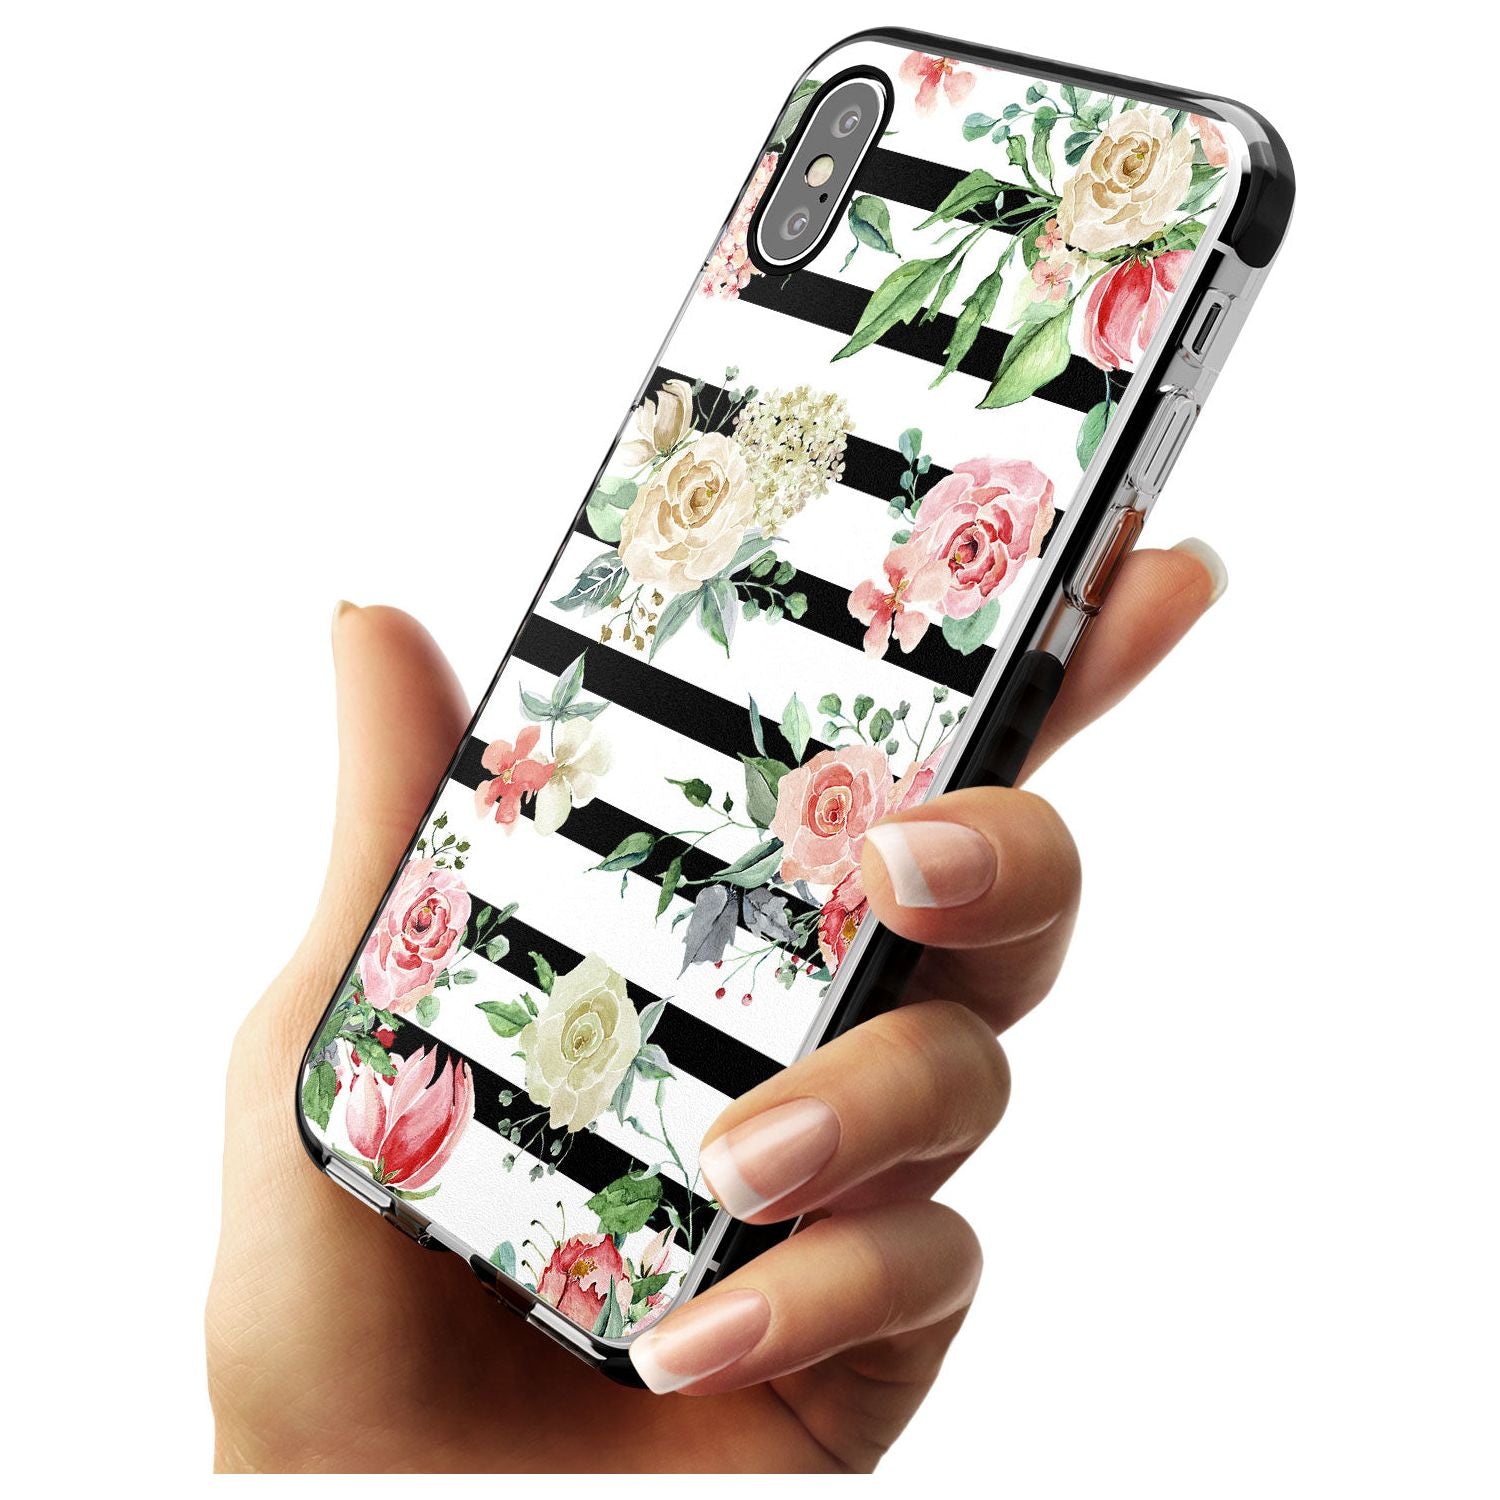 Bold Stripes & Flower Pattern Black Impact Phone Case for iPhone X XS Max XR